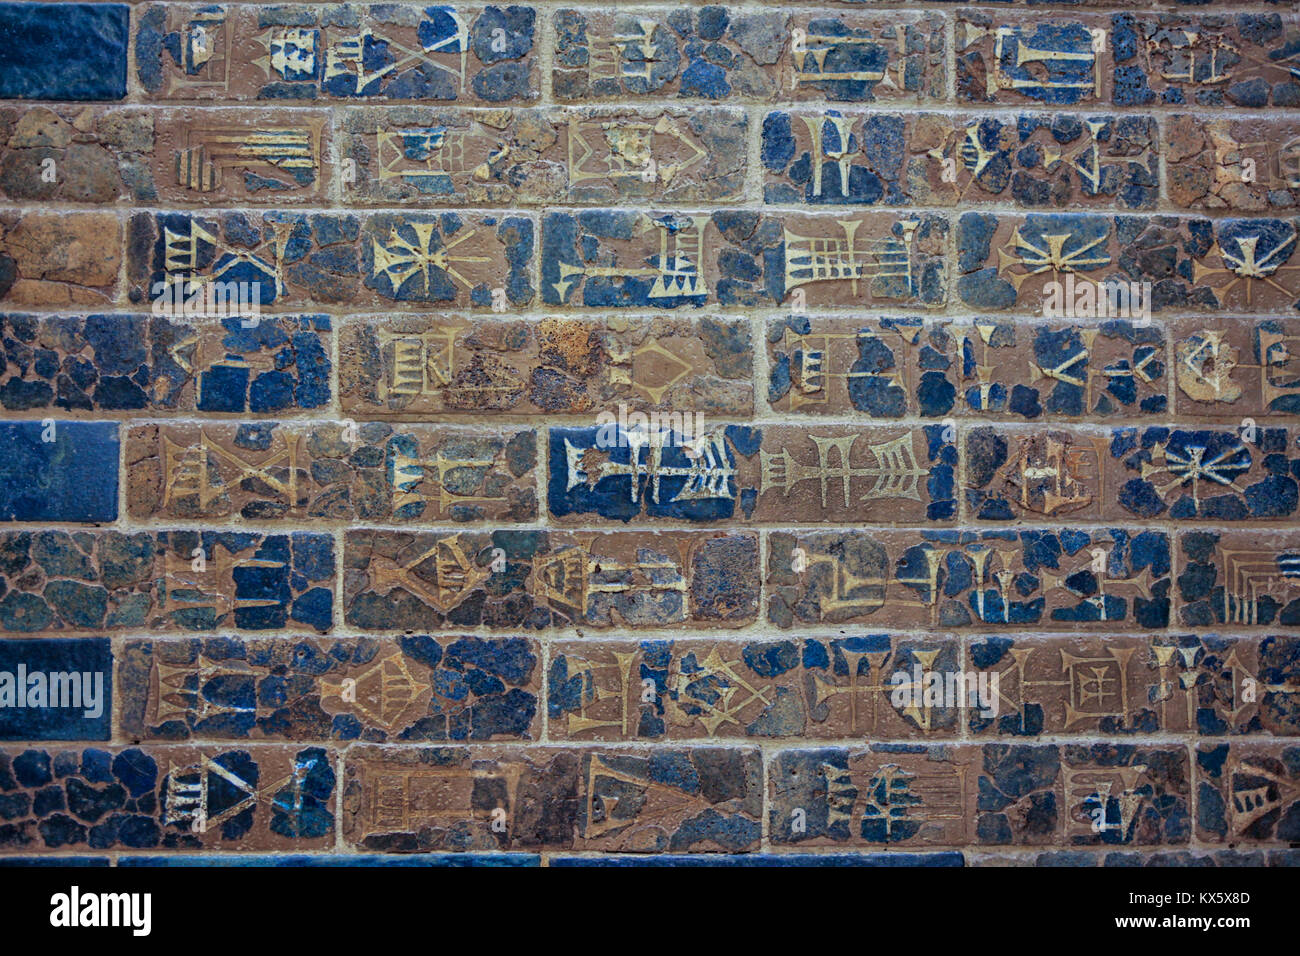 Inscription of King Nebukadnezar II, 604-562 BC. During the excavations of Babylon, in its vicinity of the Ishtar Gate, fragments of bricks with remai Stock Photo